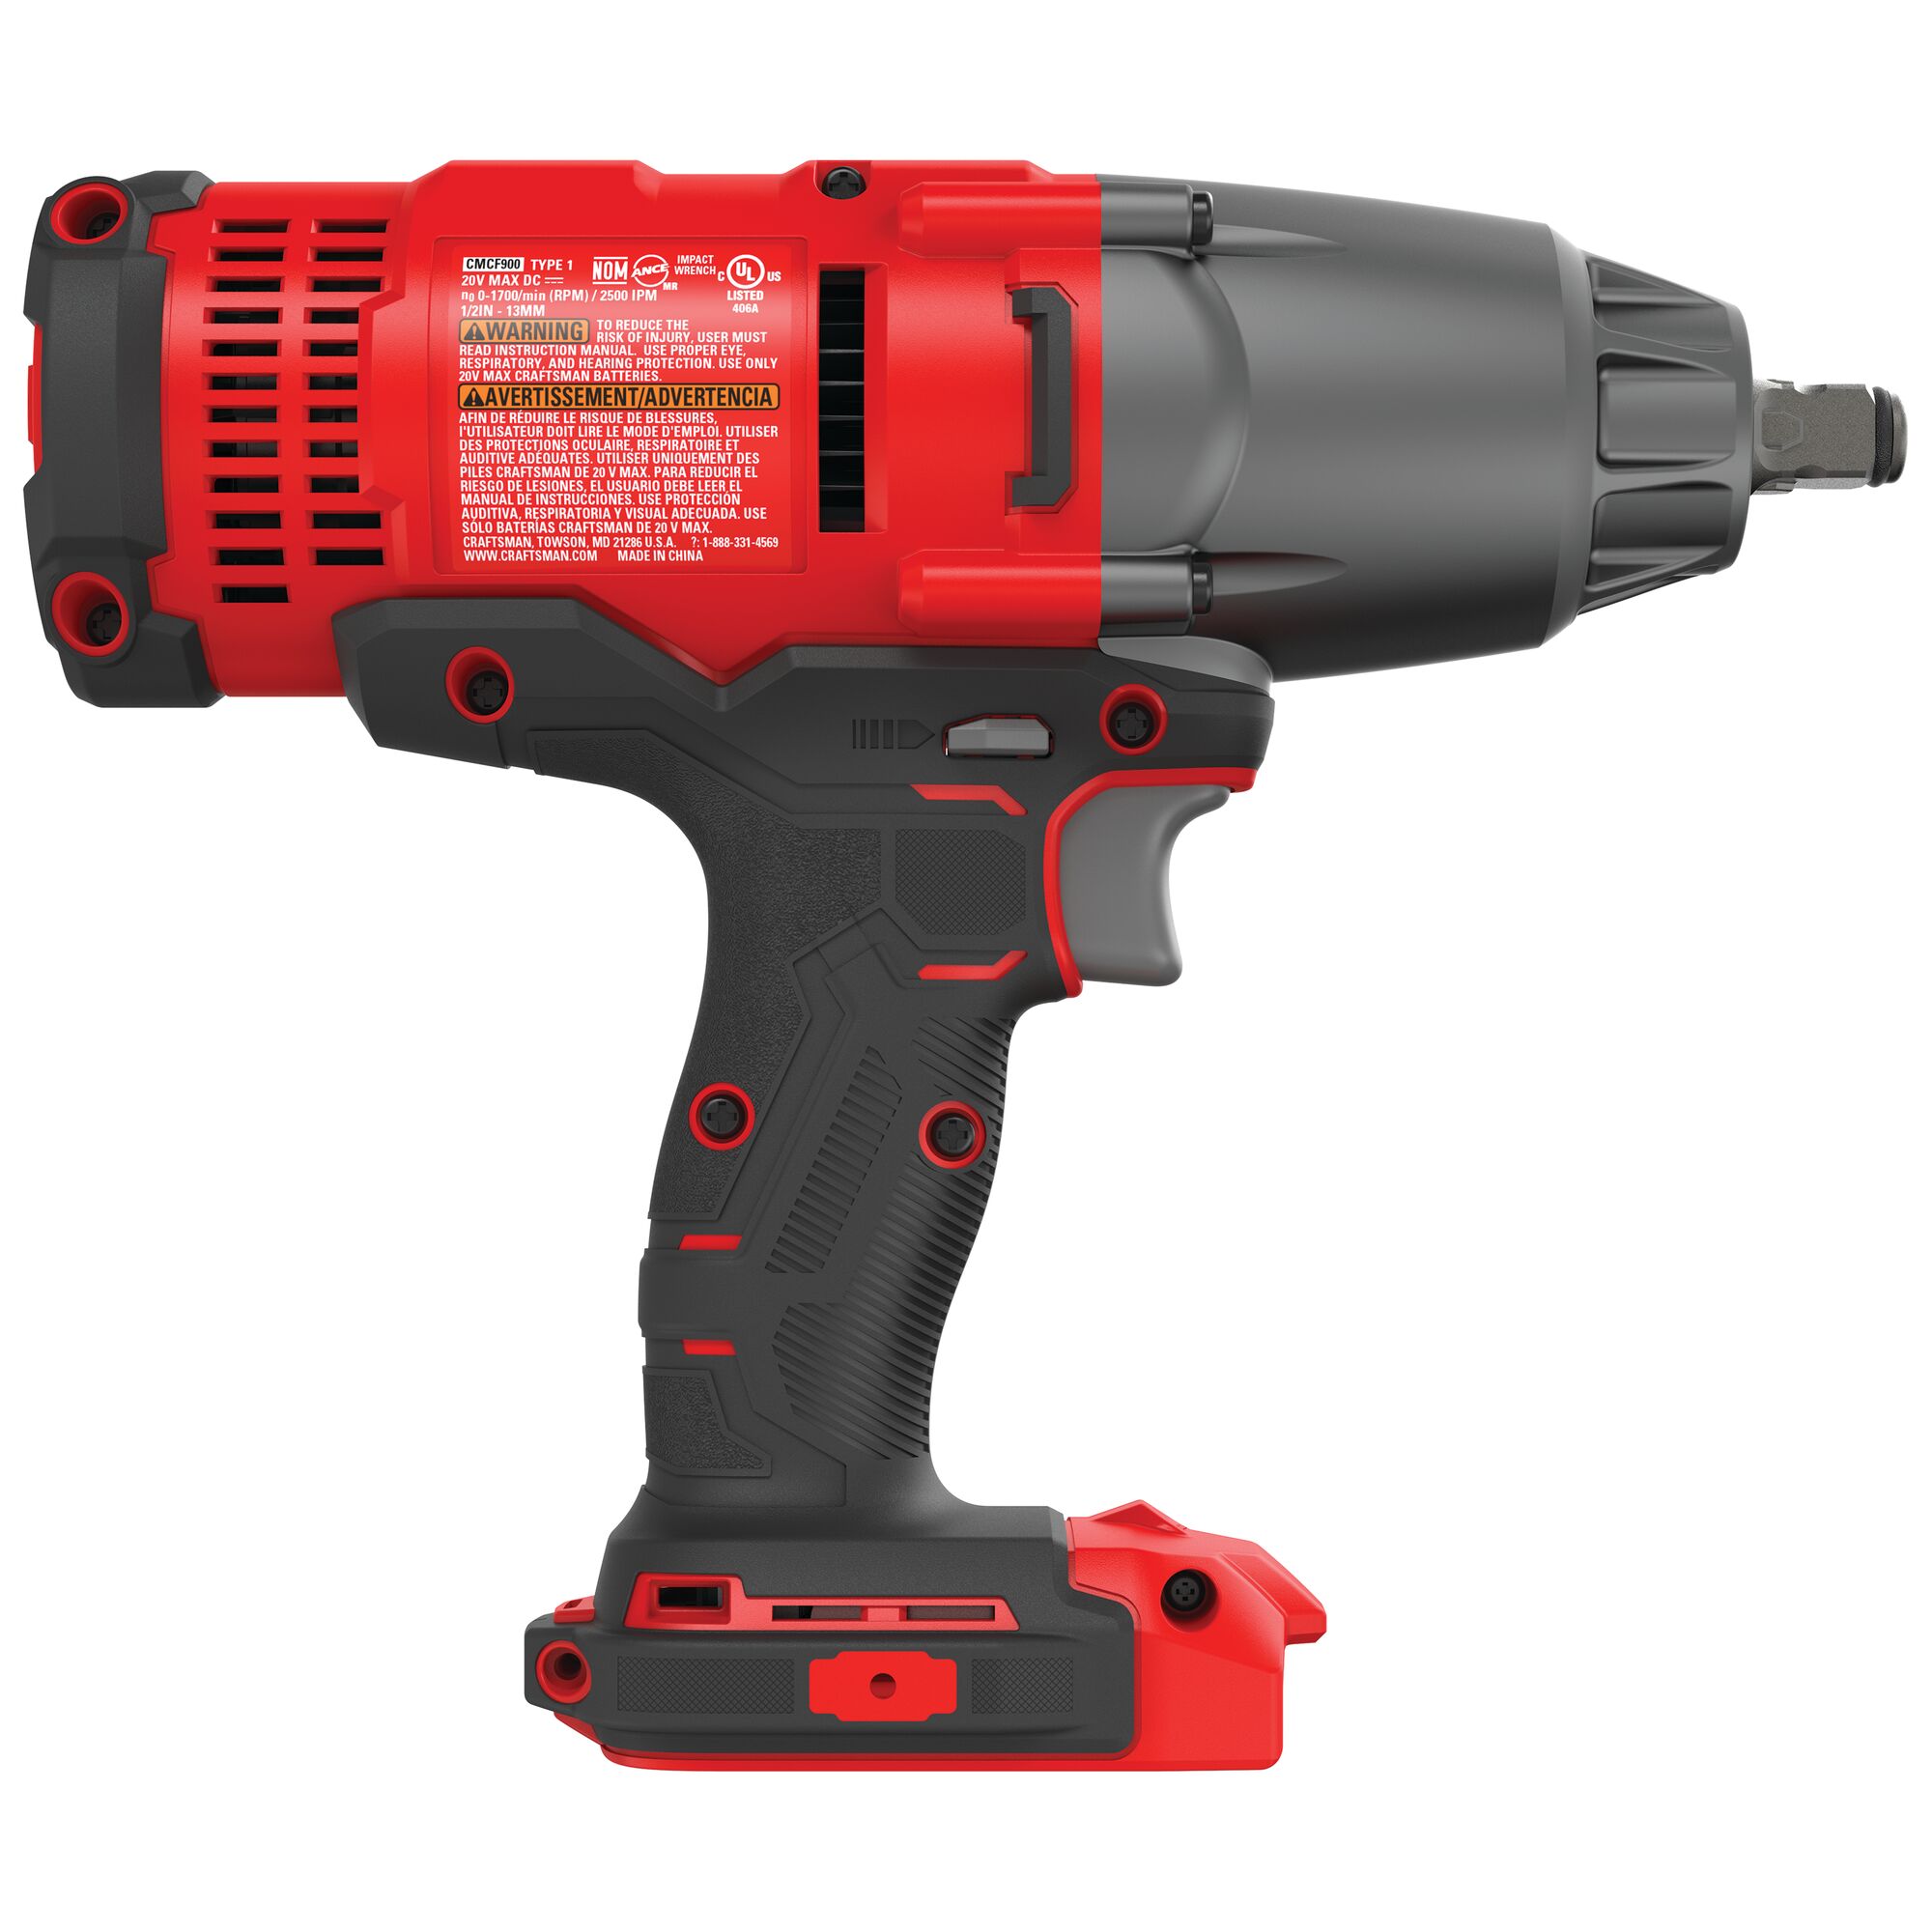 Left profile of cordless half inch impact wrench tool.